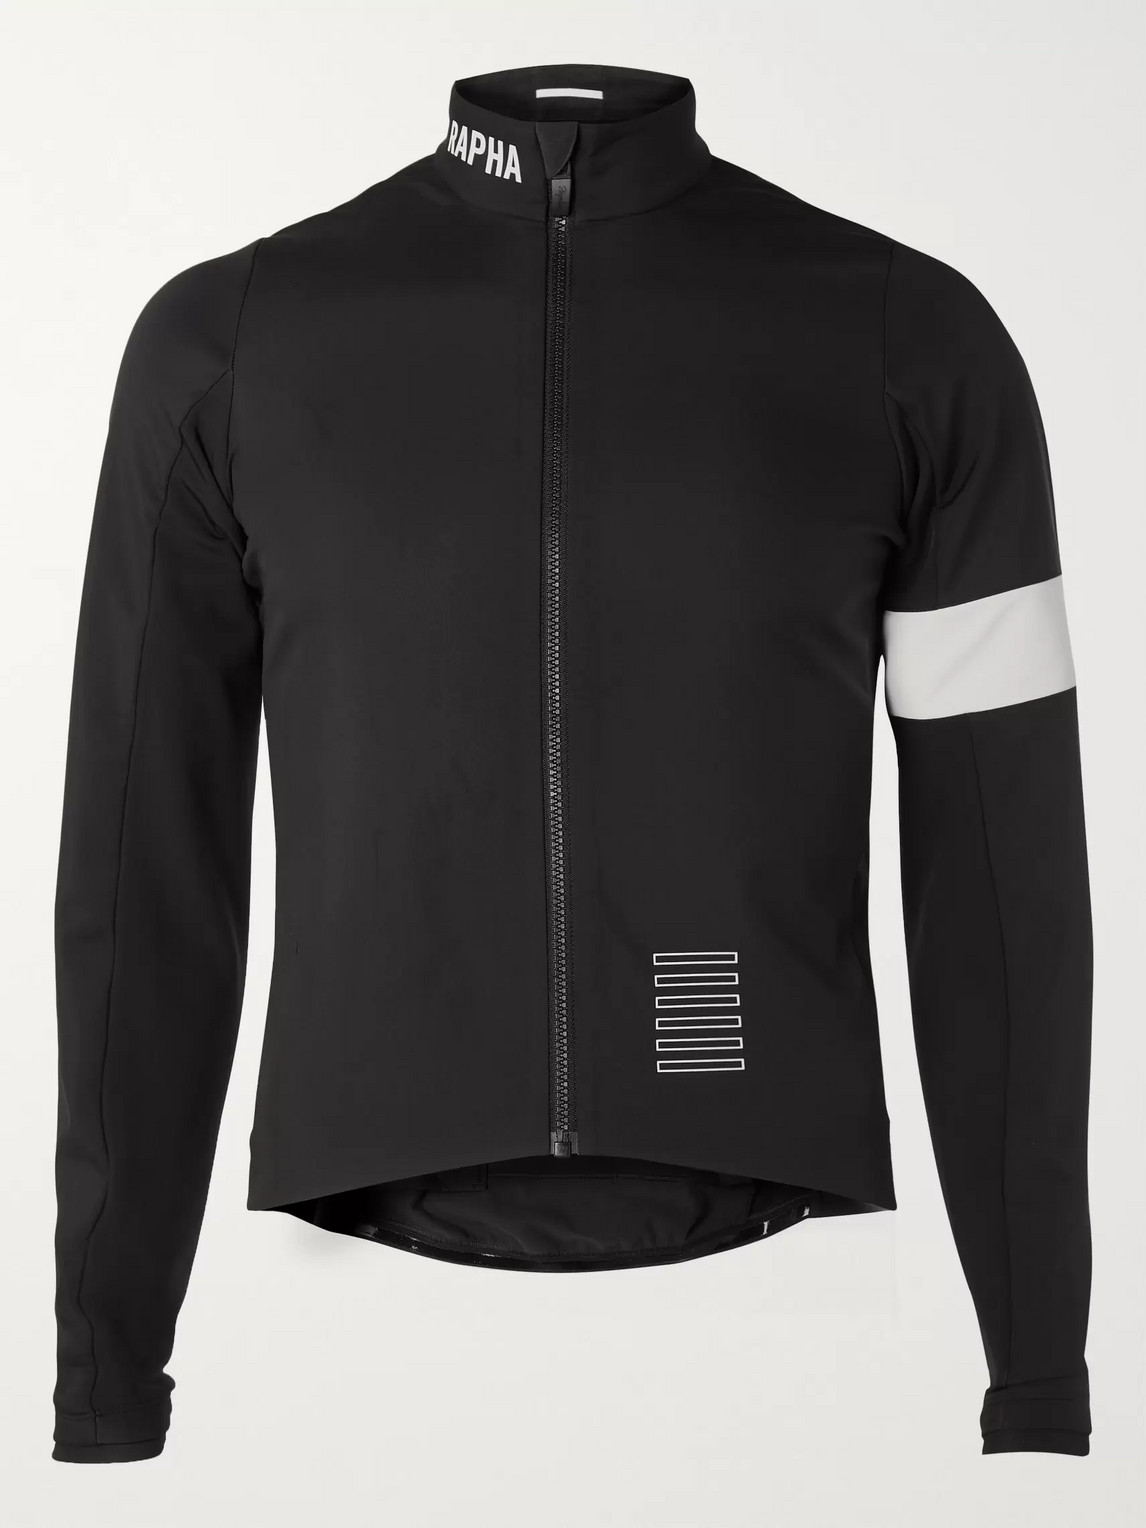 Rapha Pro Team Cycling Jacket In Black